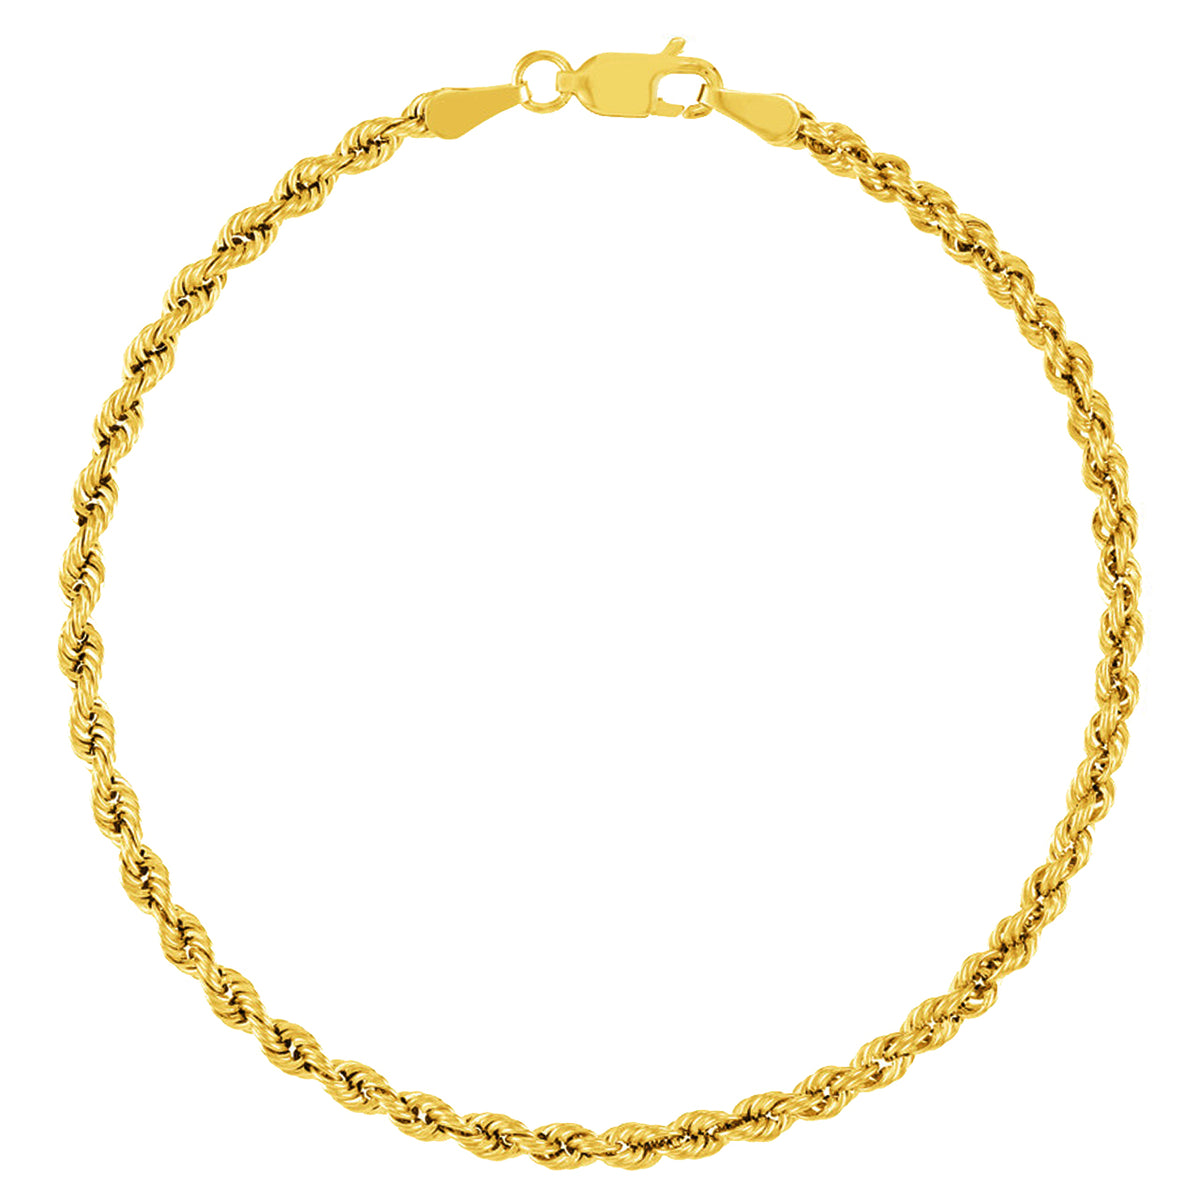 14k Yellow Gold Hollow 4mm Rope Chain Bracelet with Lobster Lock - Light Rope Chain Bracelet with Diamond Cut